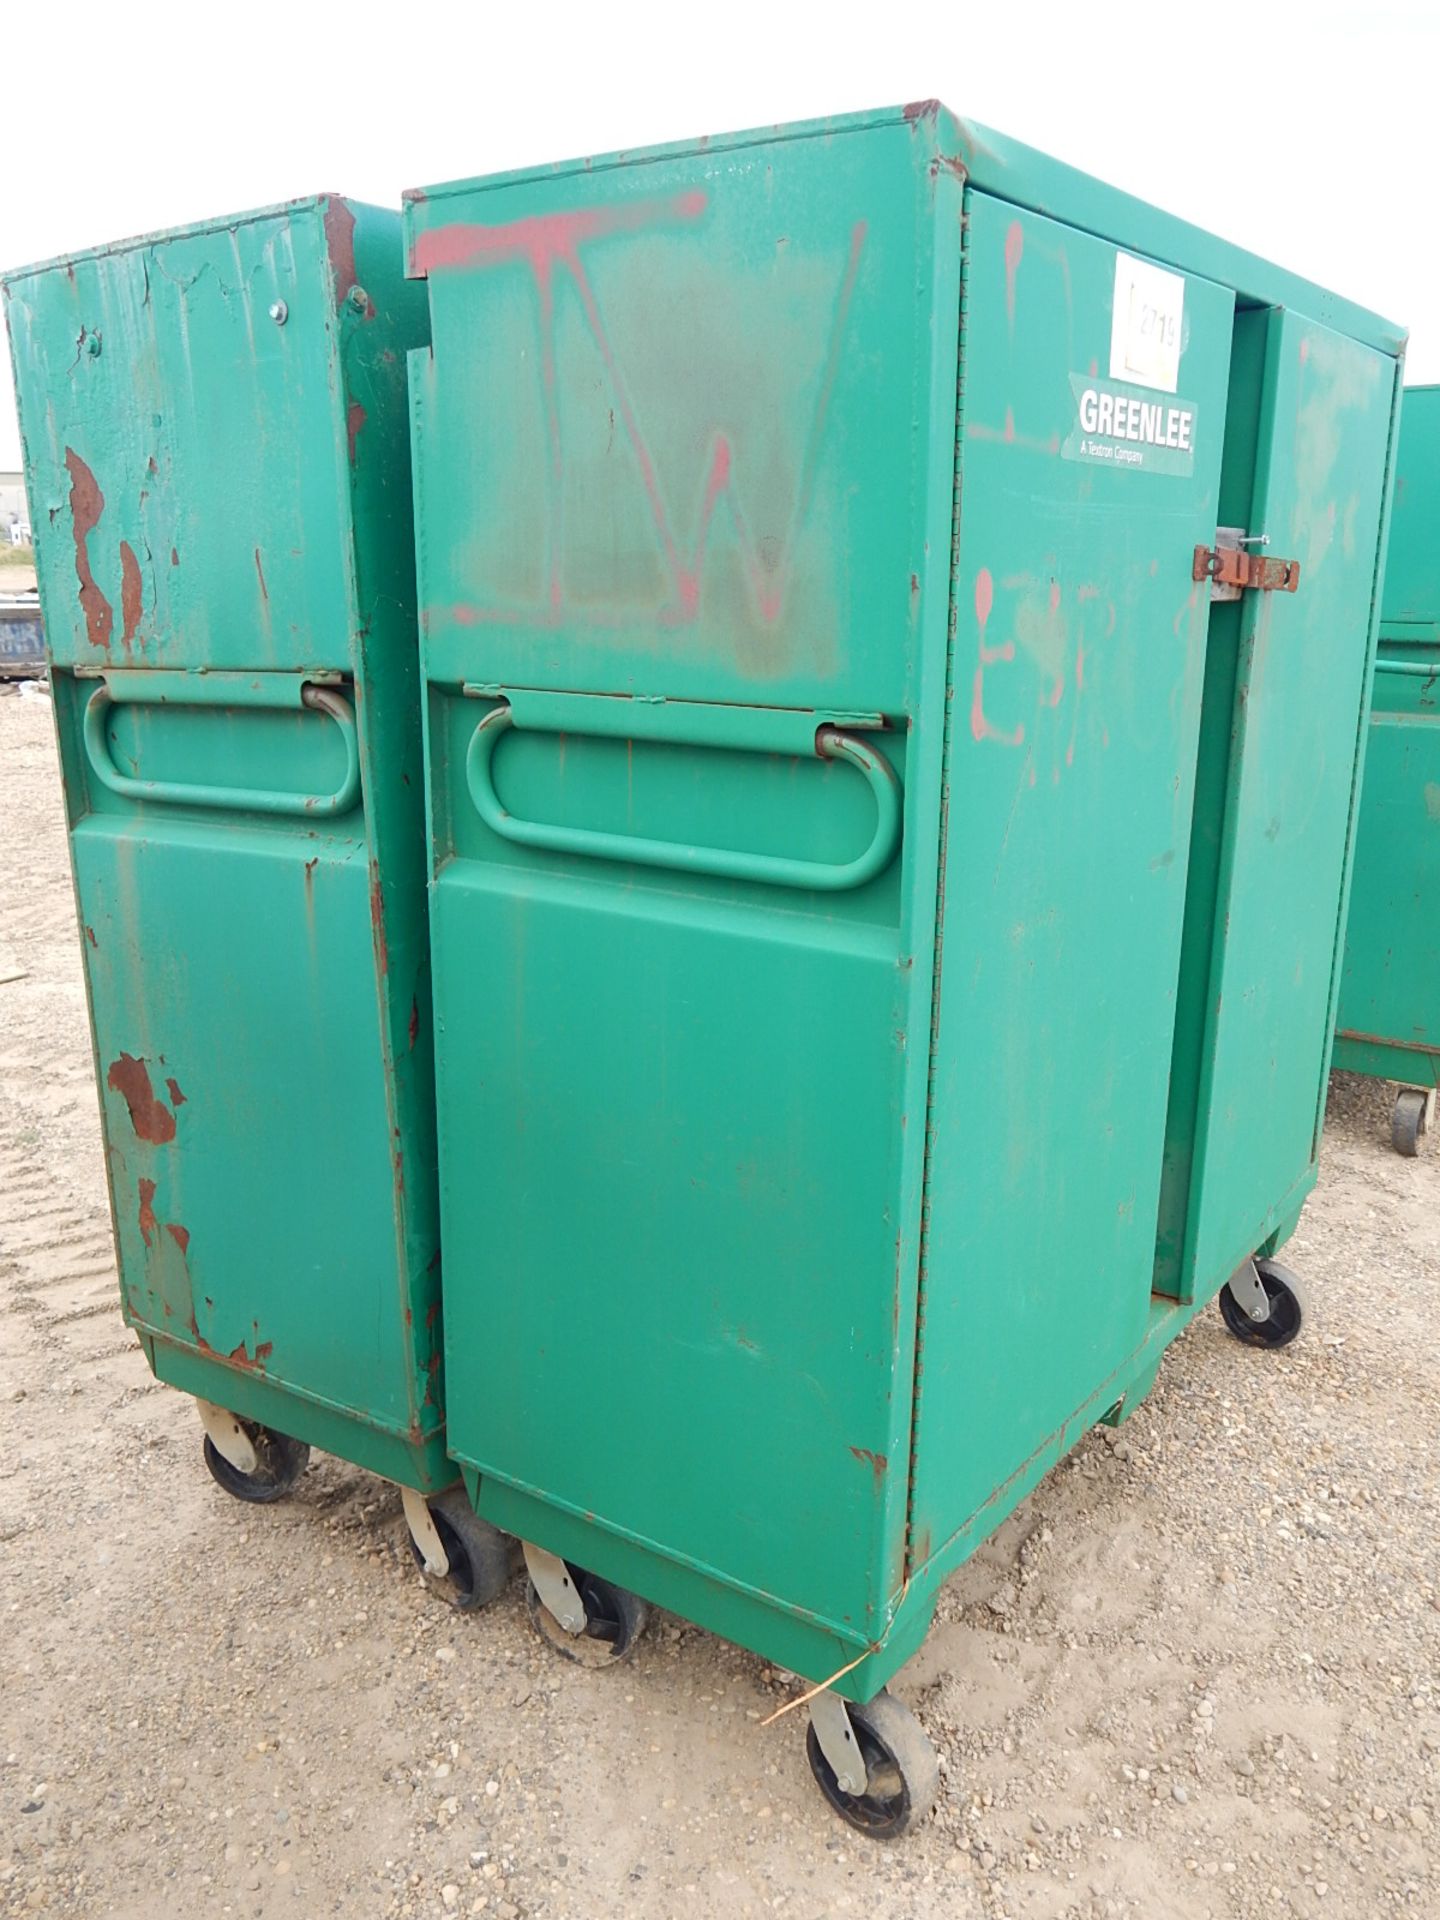 LOT/ (2) GREENLEE 2 DOOR TOOL CABINETS WITH WHEELS - Image 2 of 3